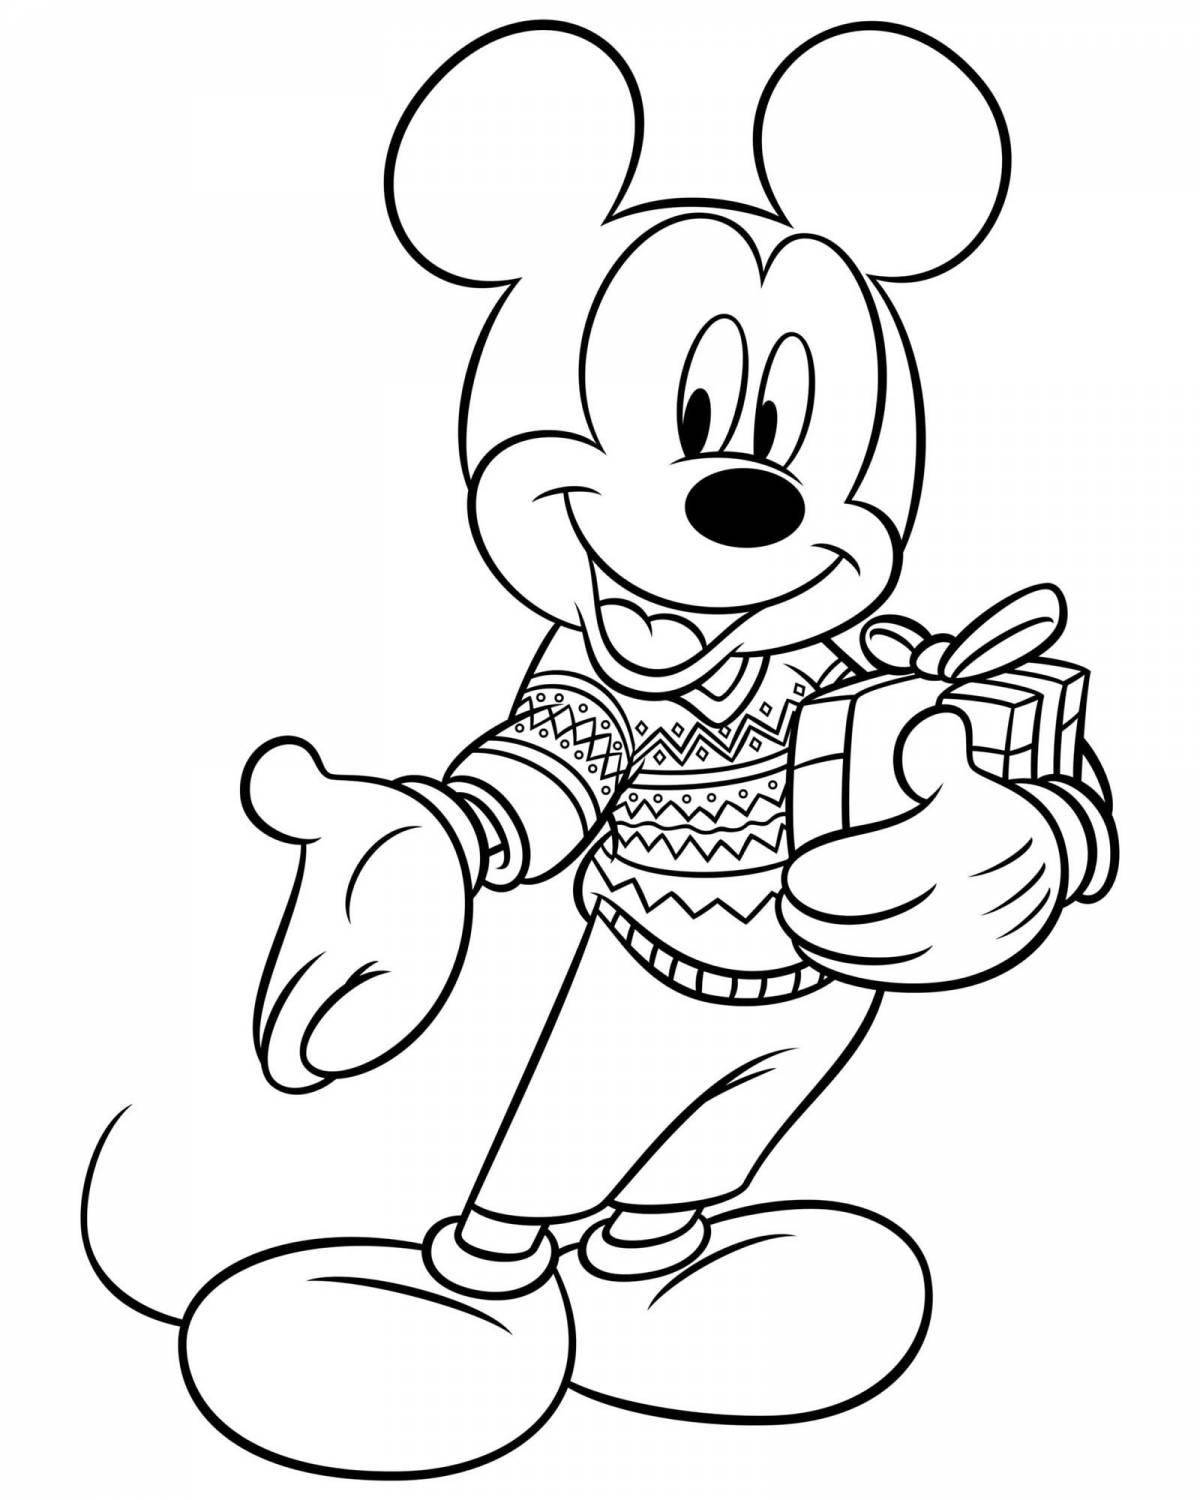 Mikimaus coloring book for juniors